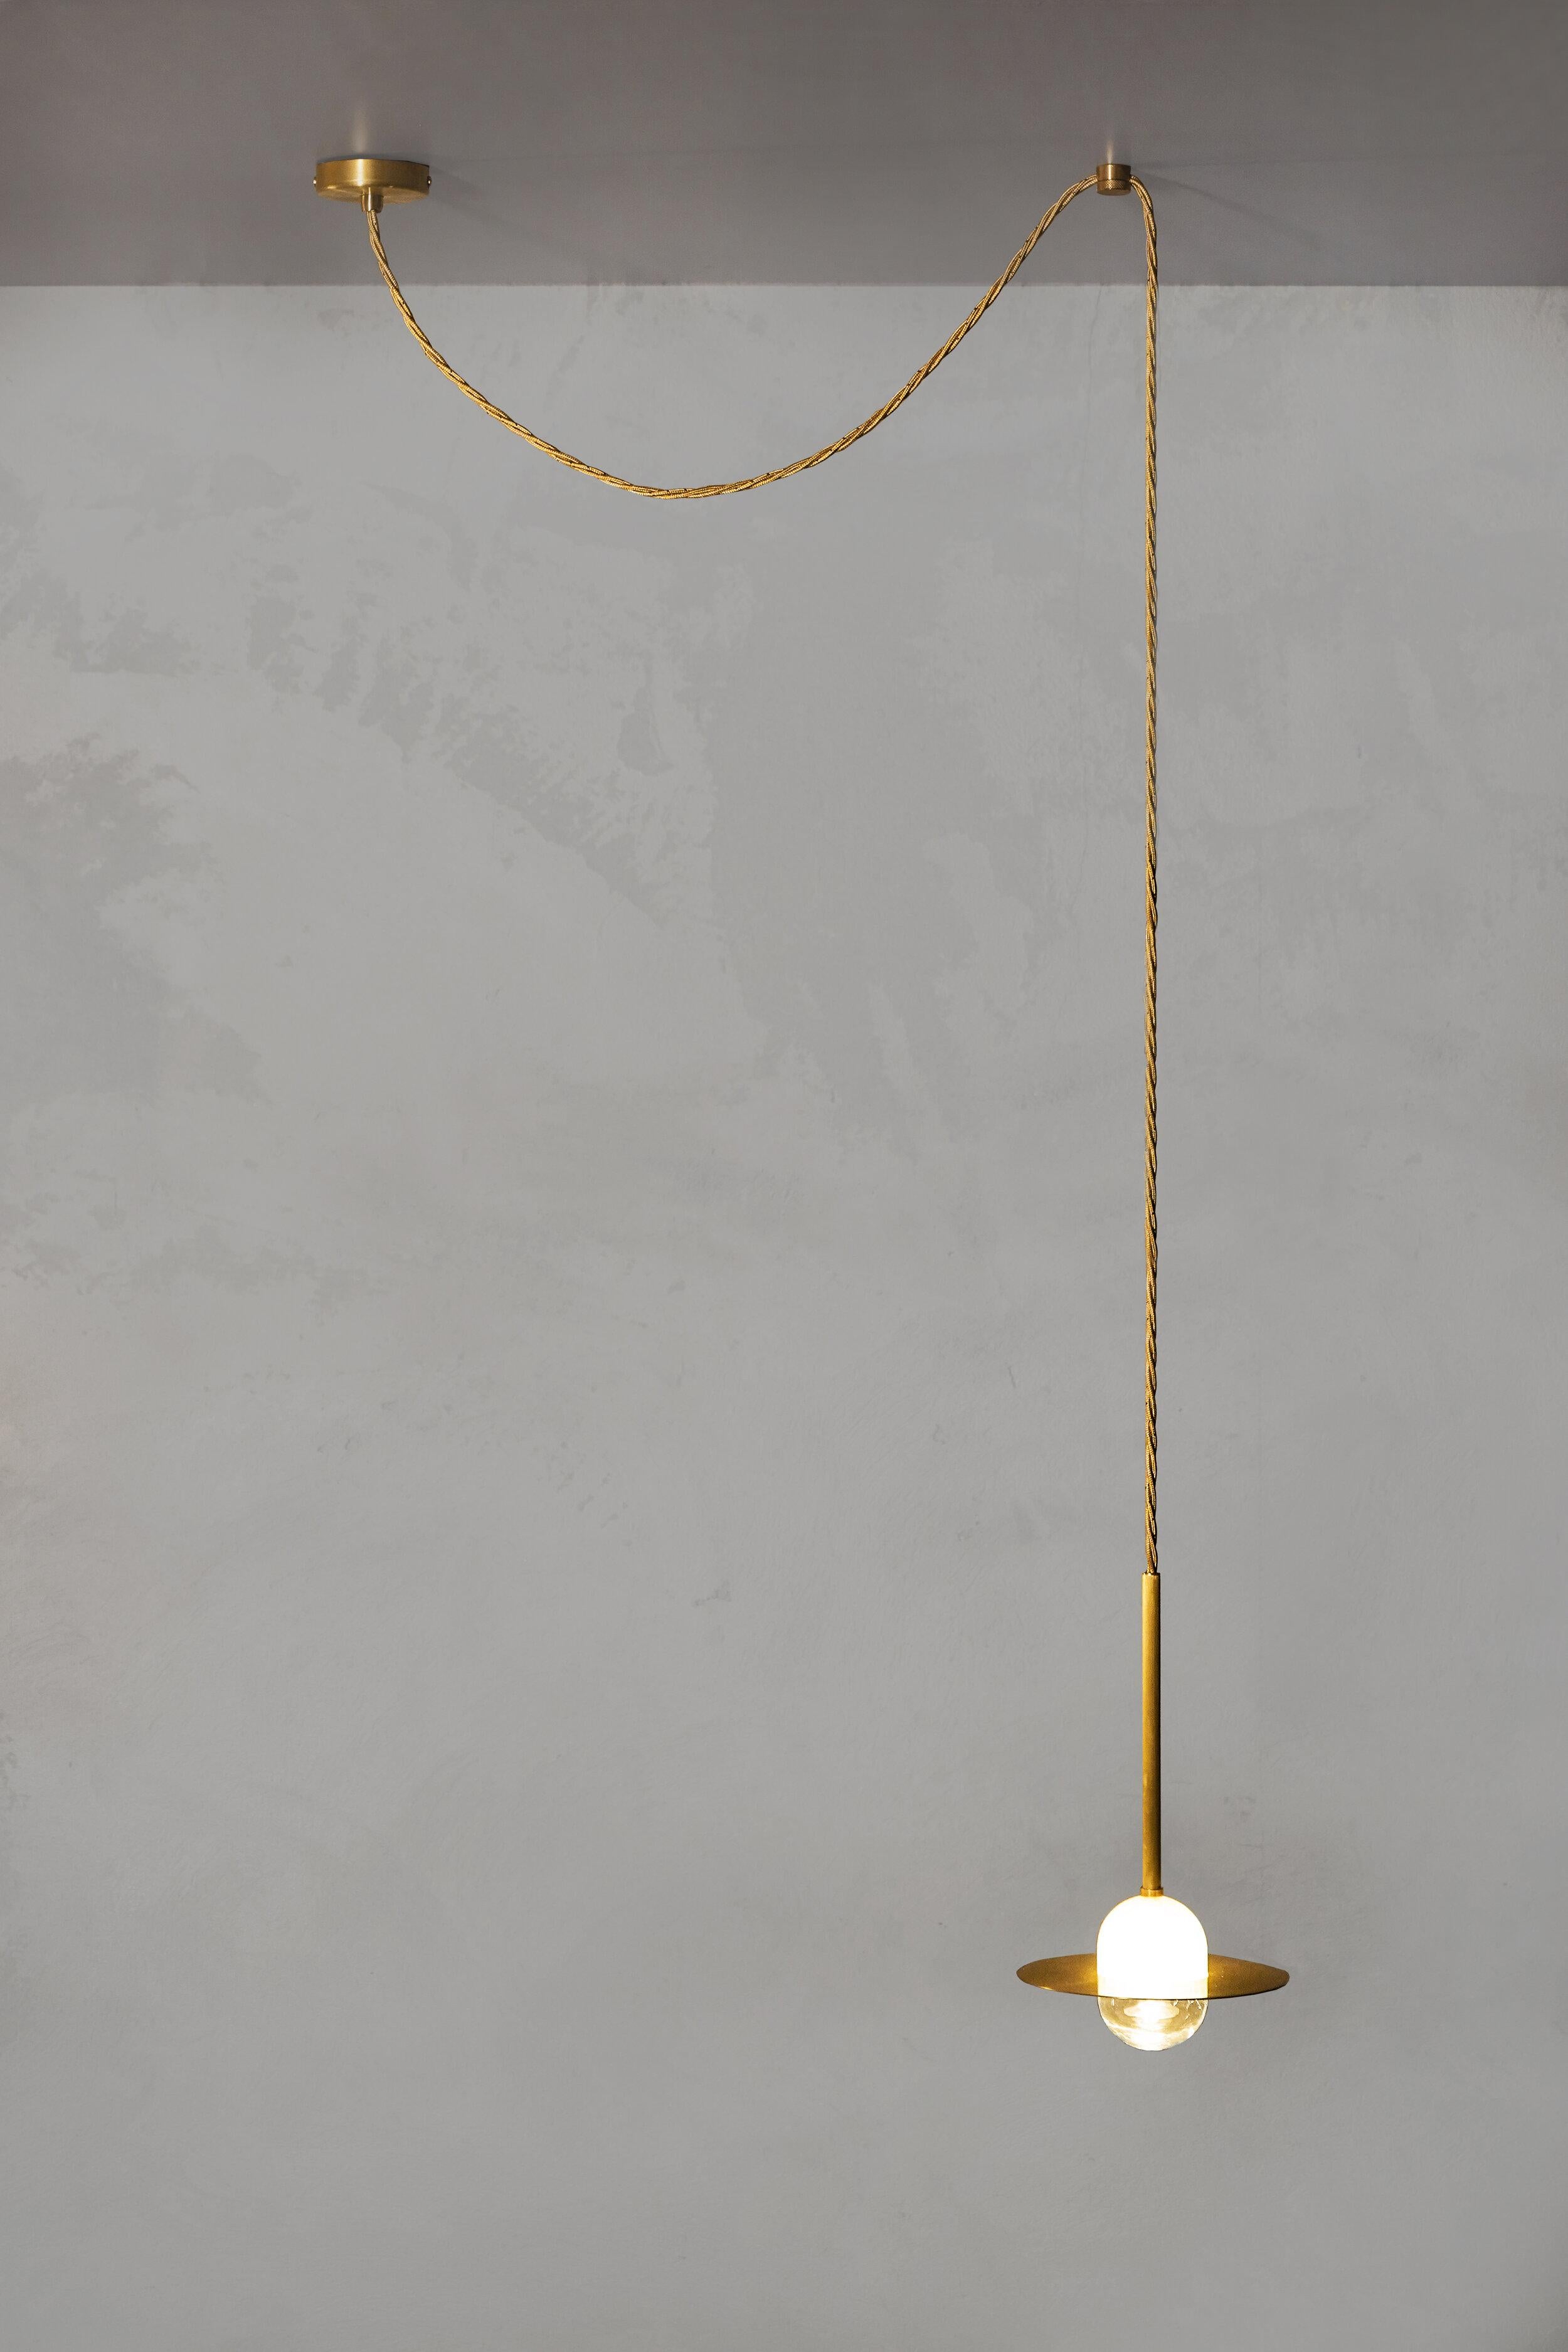 Alba pendant cable by Contain.
Dimensions: D 15 x W 15 H 100 cm (custom lenght).
Materials: brass, 3D printed PLA structure and optical lens.
Also available in different finishes.

All our lamps can be wired according to each country. If sold